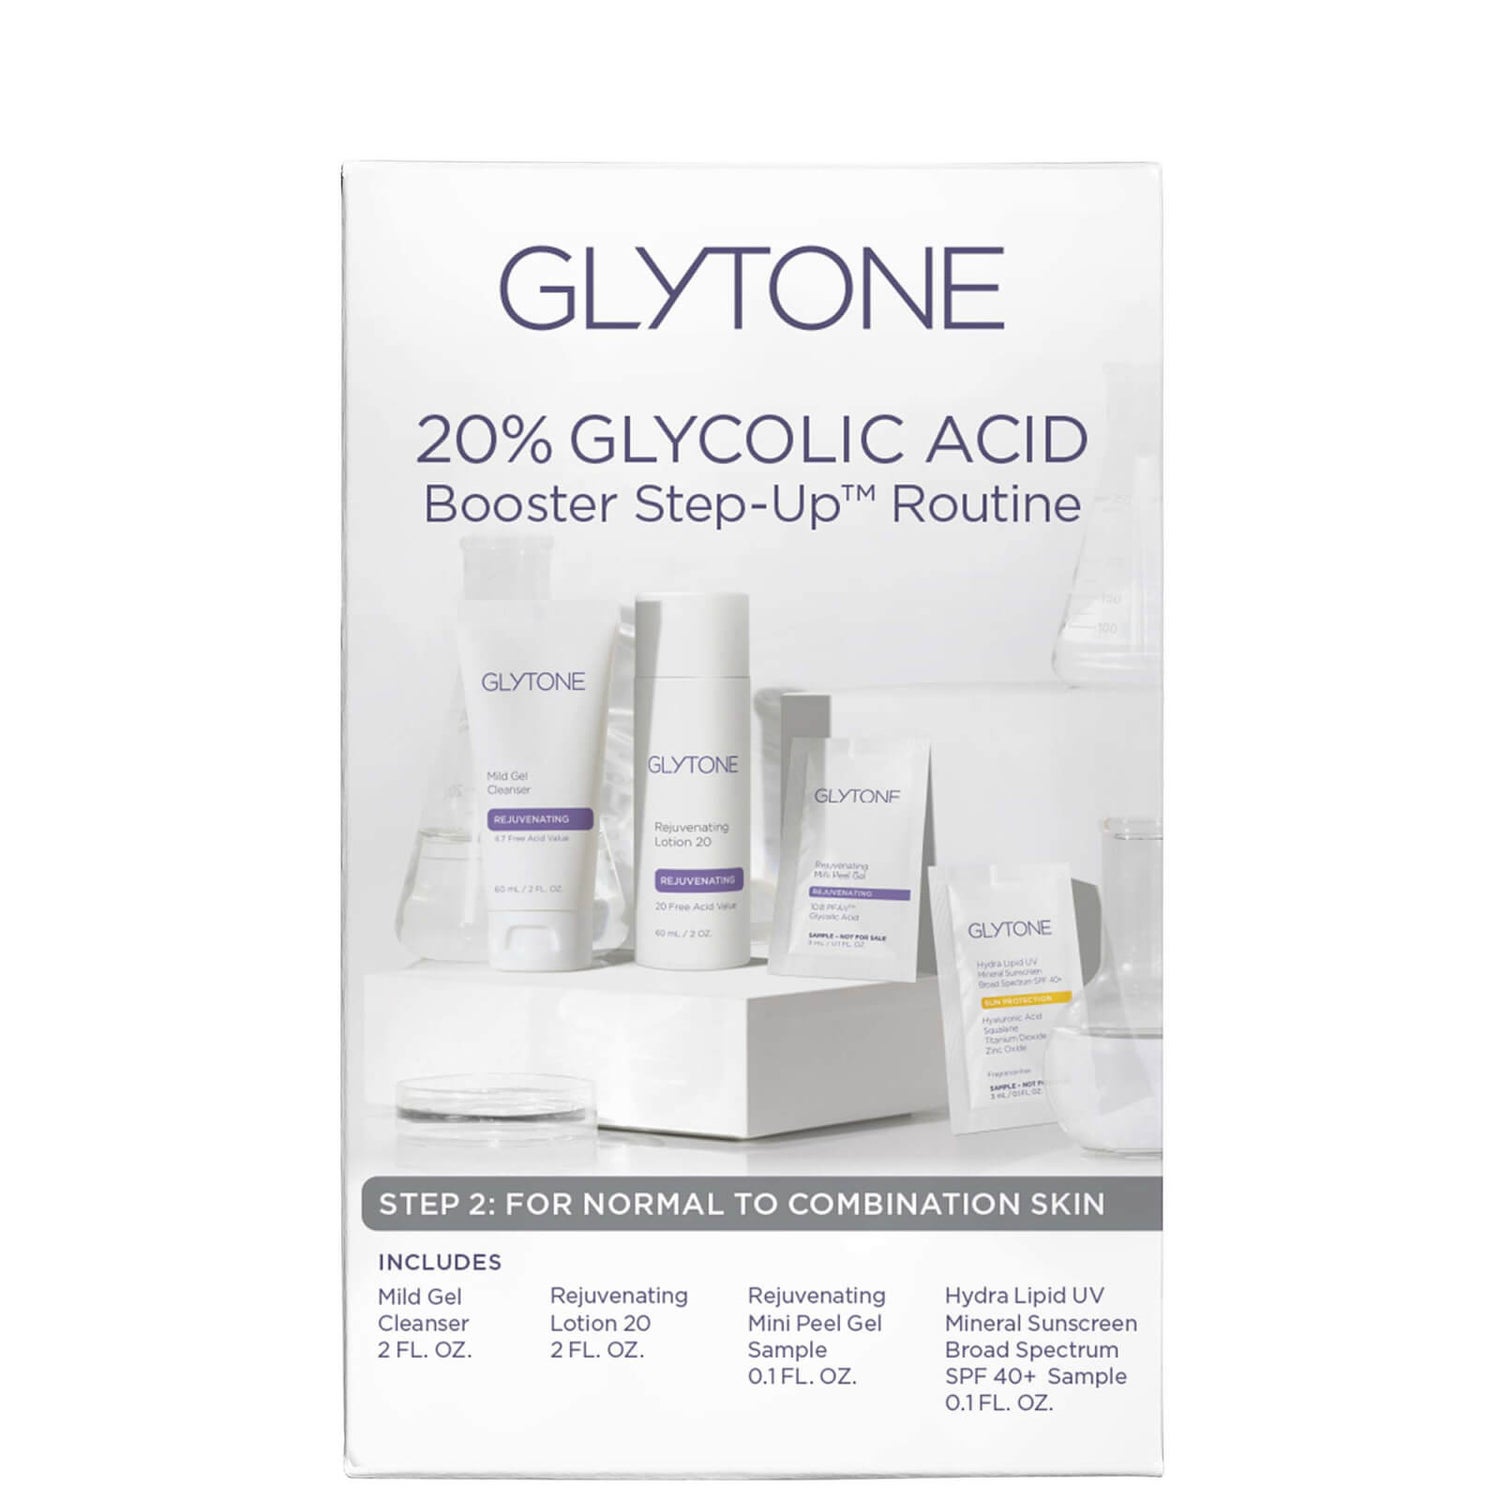 Glytone 20% Glycolic Acid Booster Step-Up Routine: Step 2 - For Normal to Combination Skin